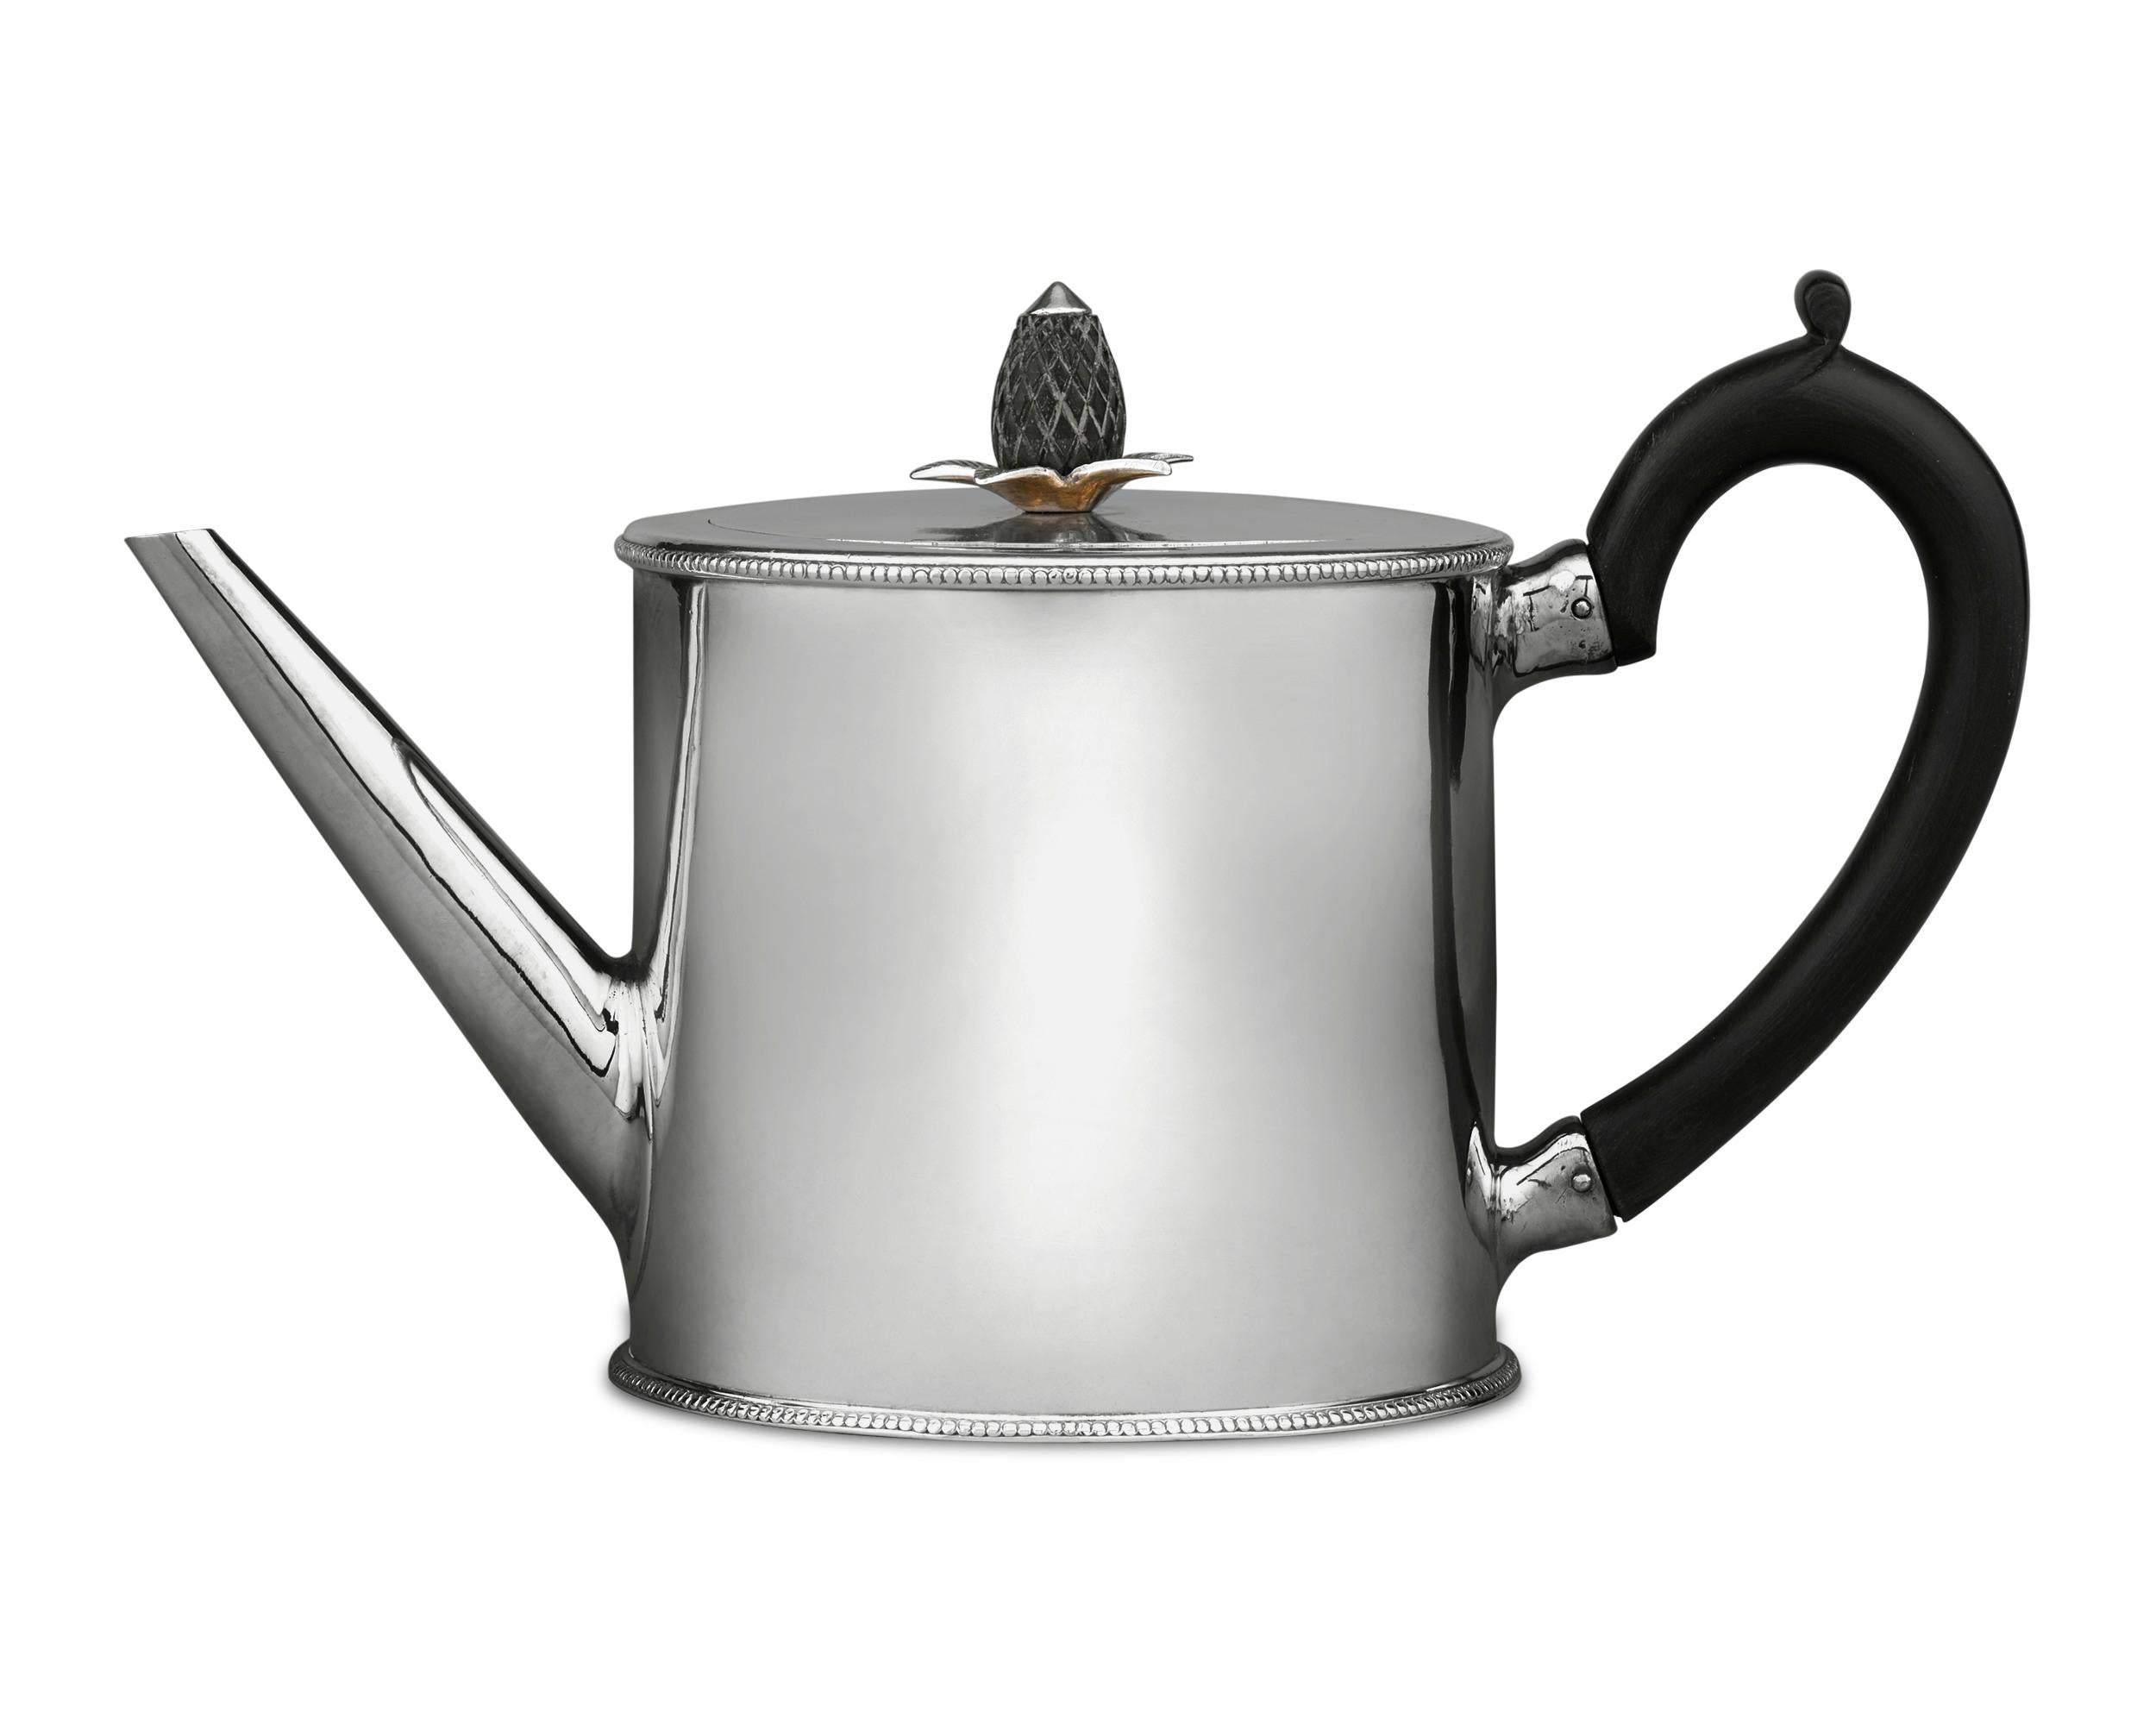 A work of refinement, this George III silver teapot was crafted by the legendary female silversmith Hester Bateman. Its round form is accentuated by Bateman's signature beaded trim, while a pineapple finial and handle, both carved from ebony, add